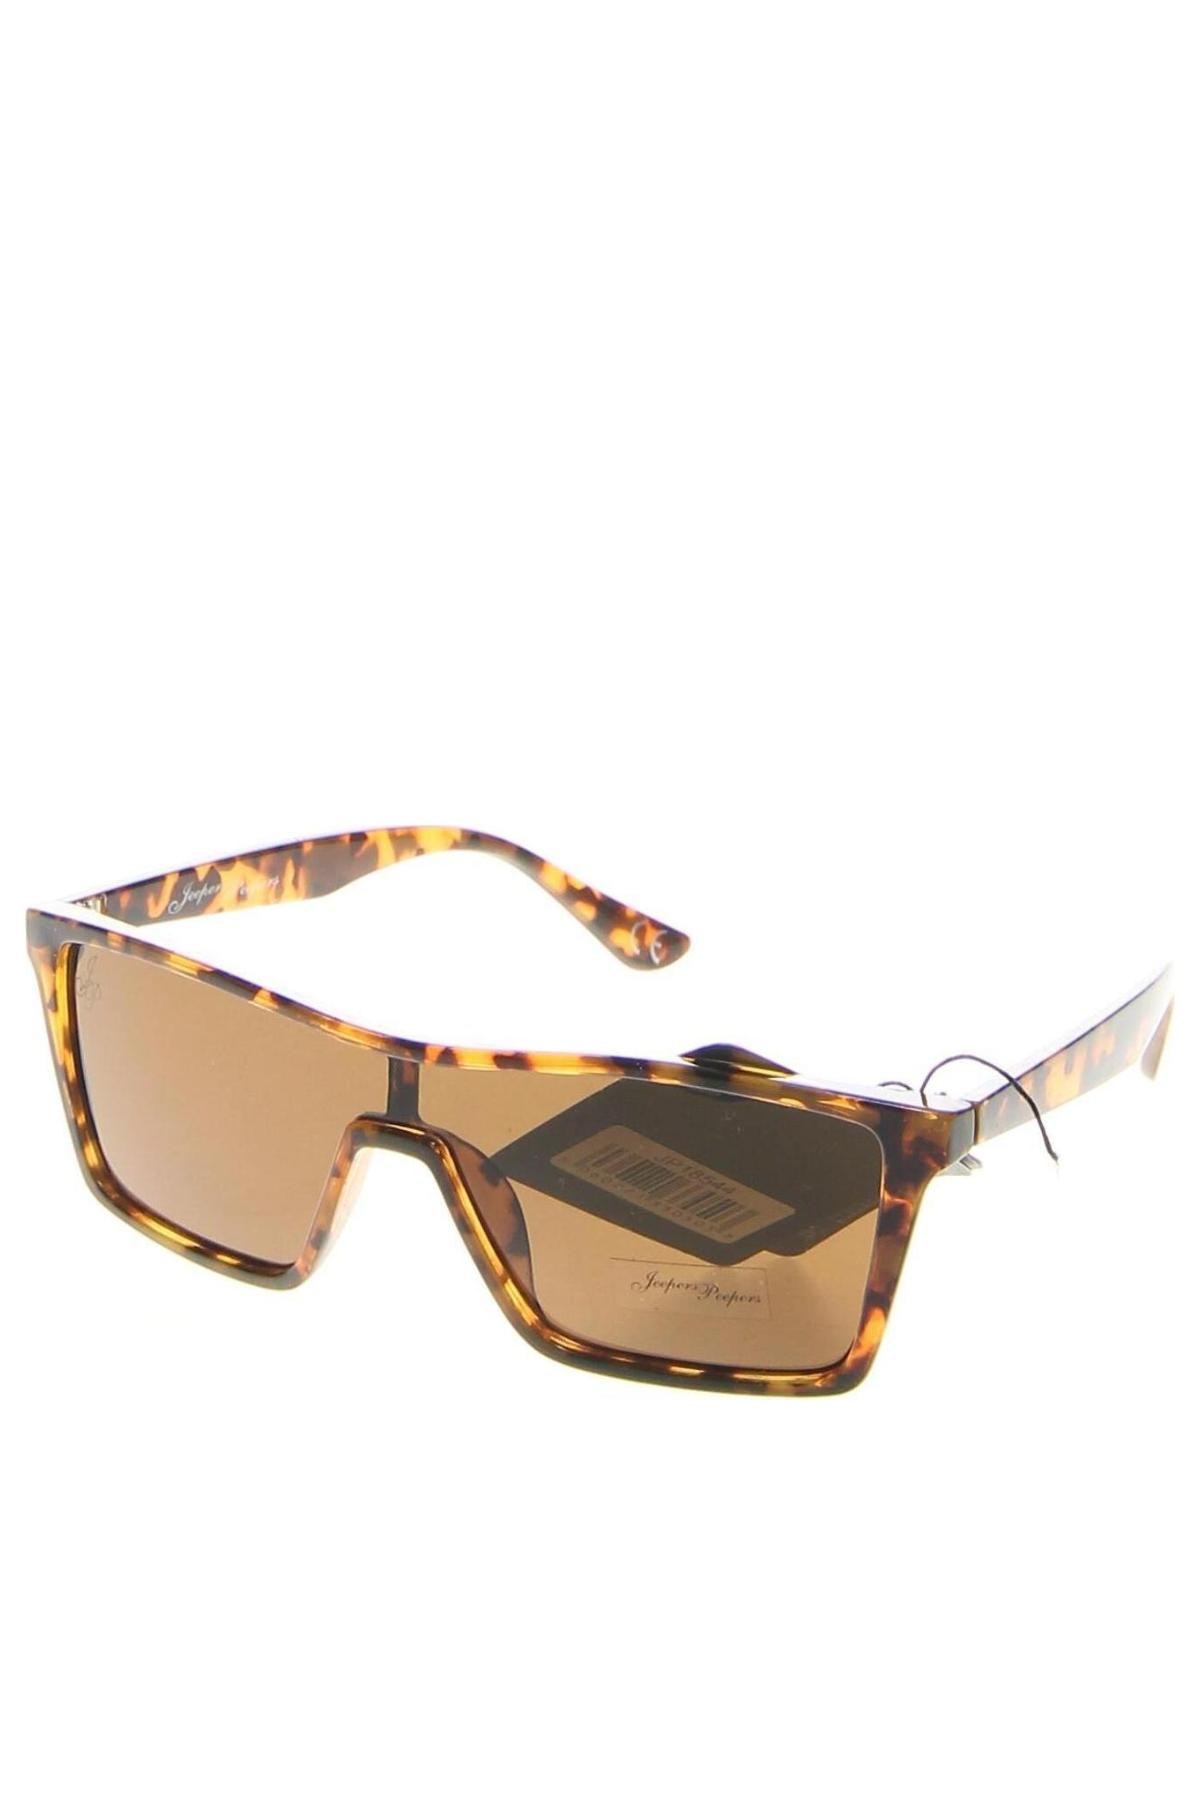 Sonnenbrille Jeepers Peepers, Farbe Beige, Preis € 39,00